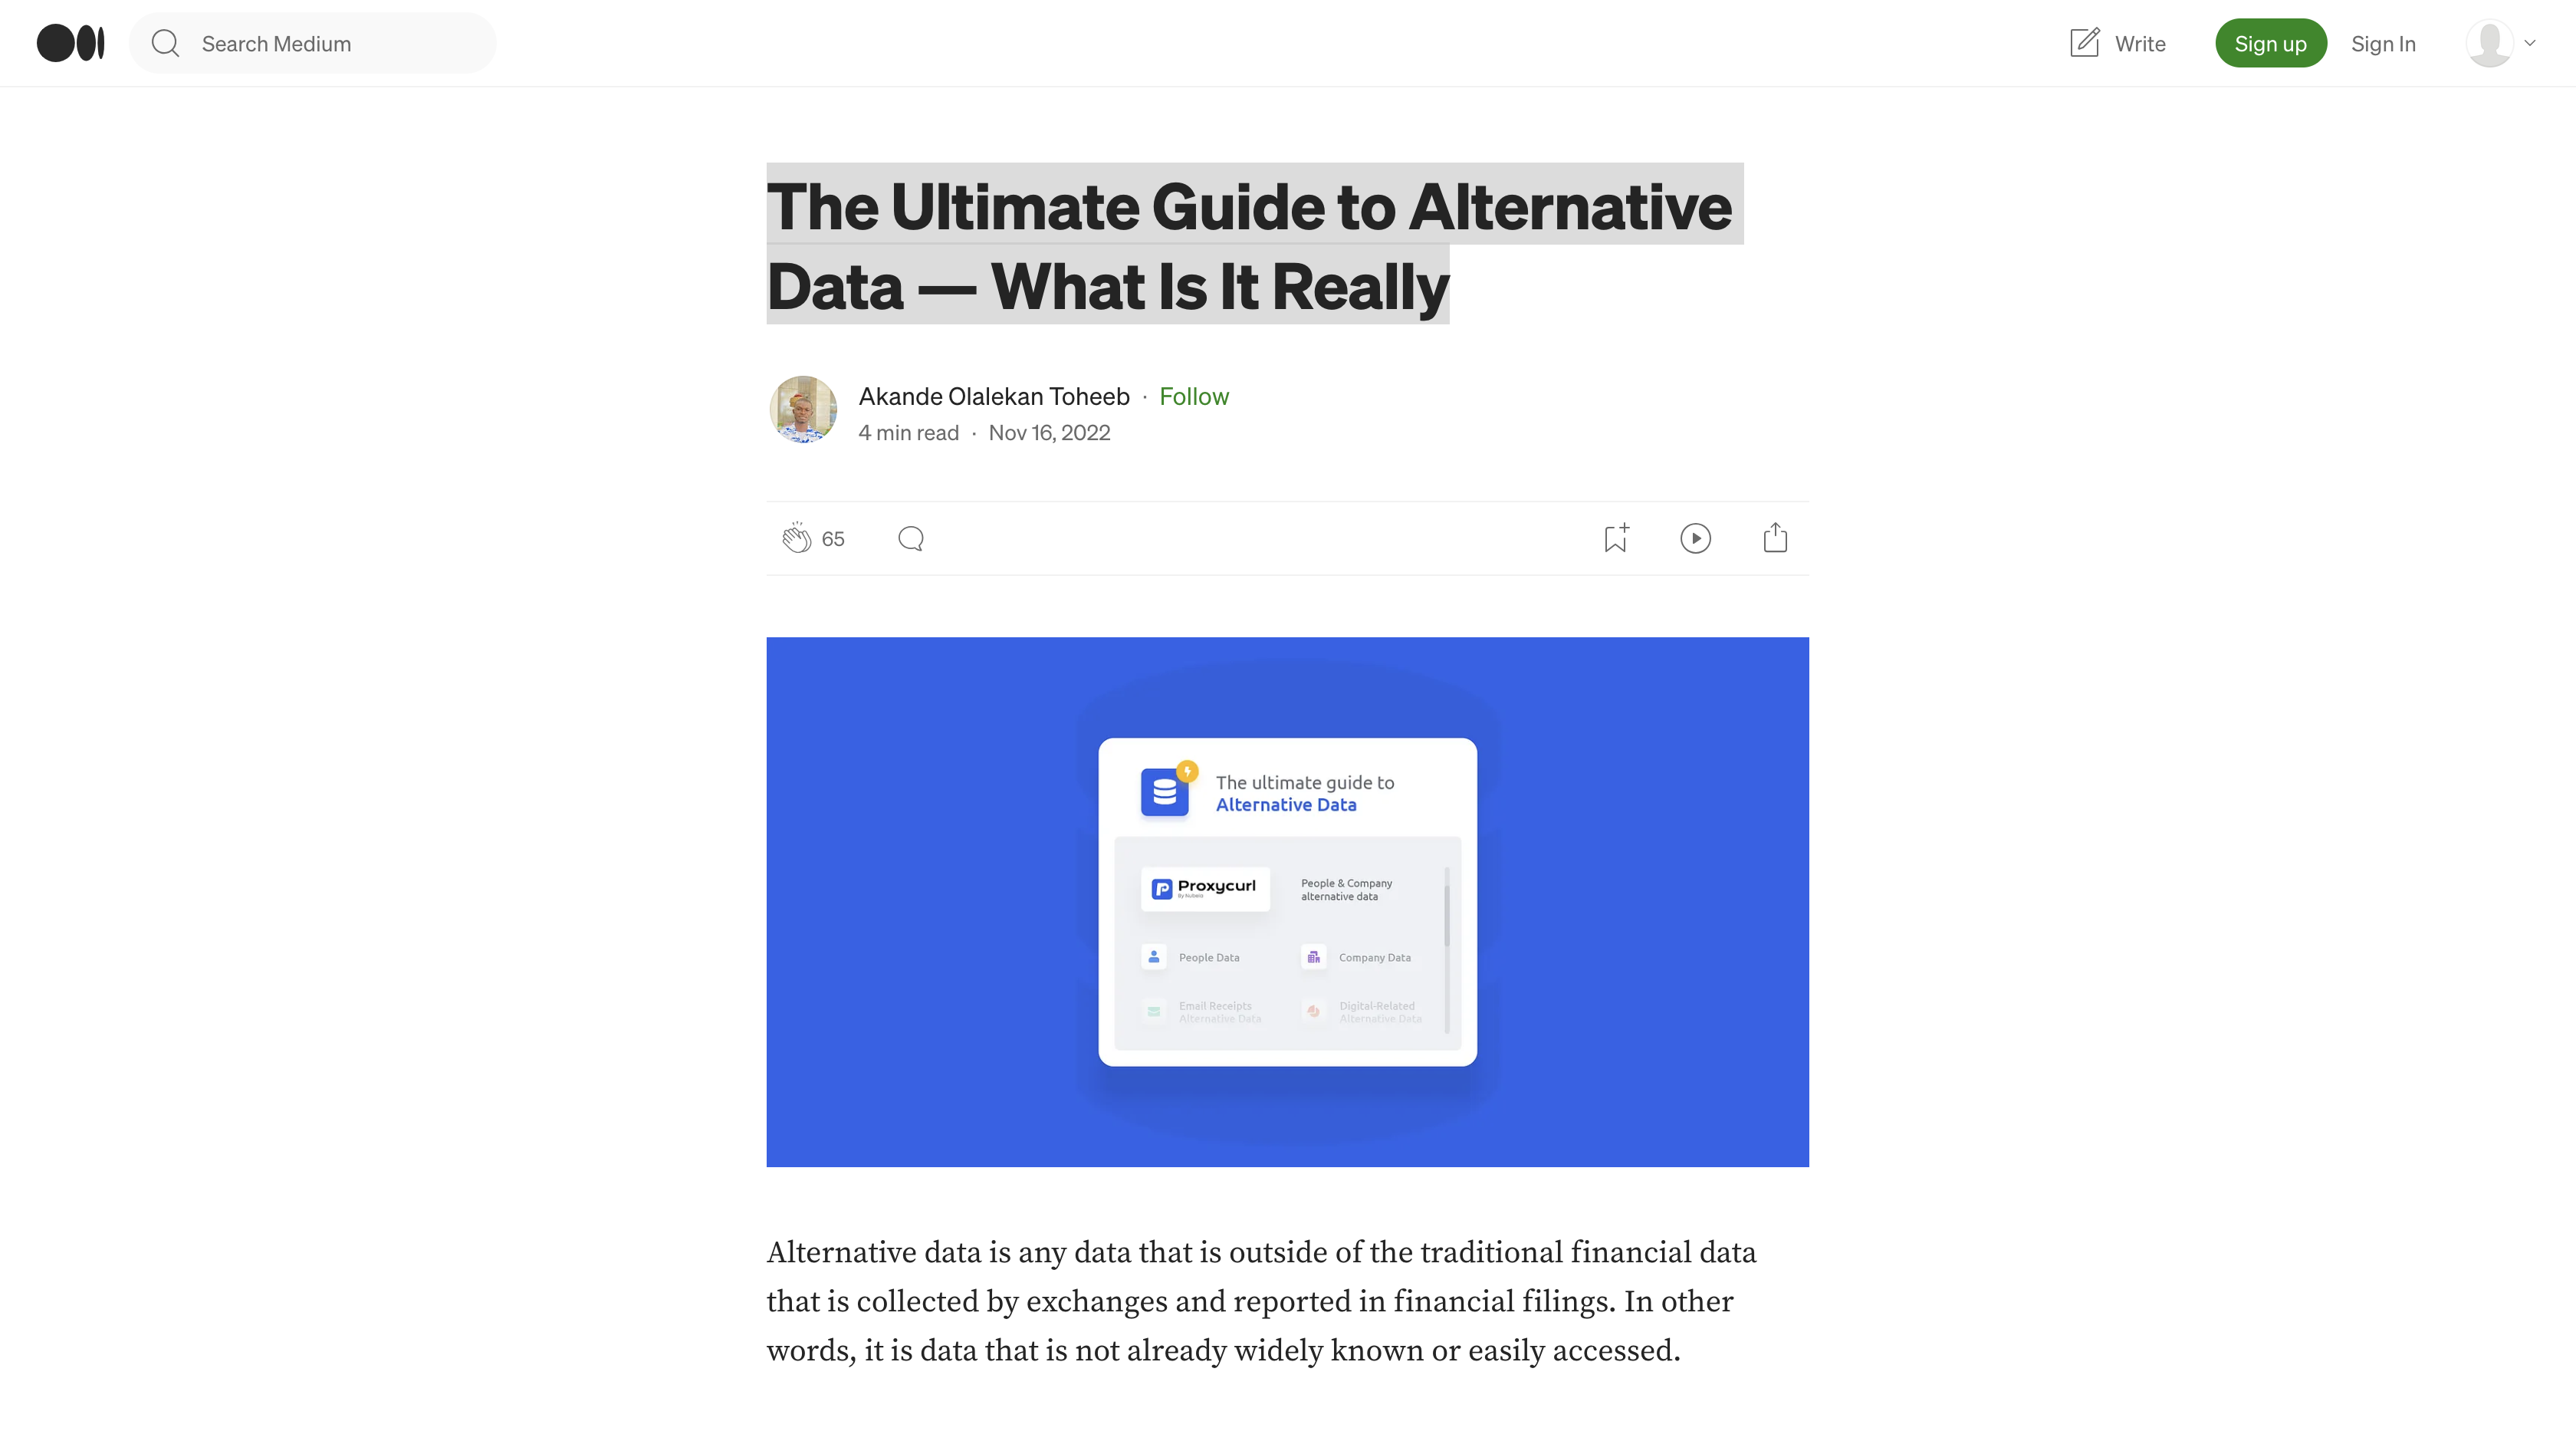 The Ultimate Guide to Alternative Data — What Is It Really